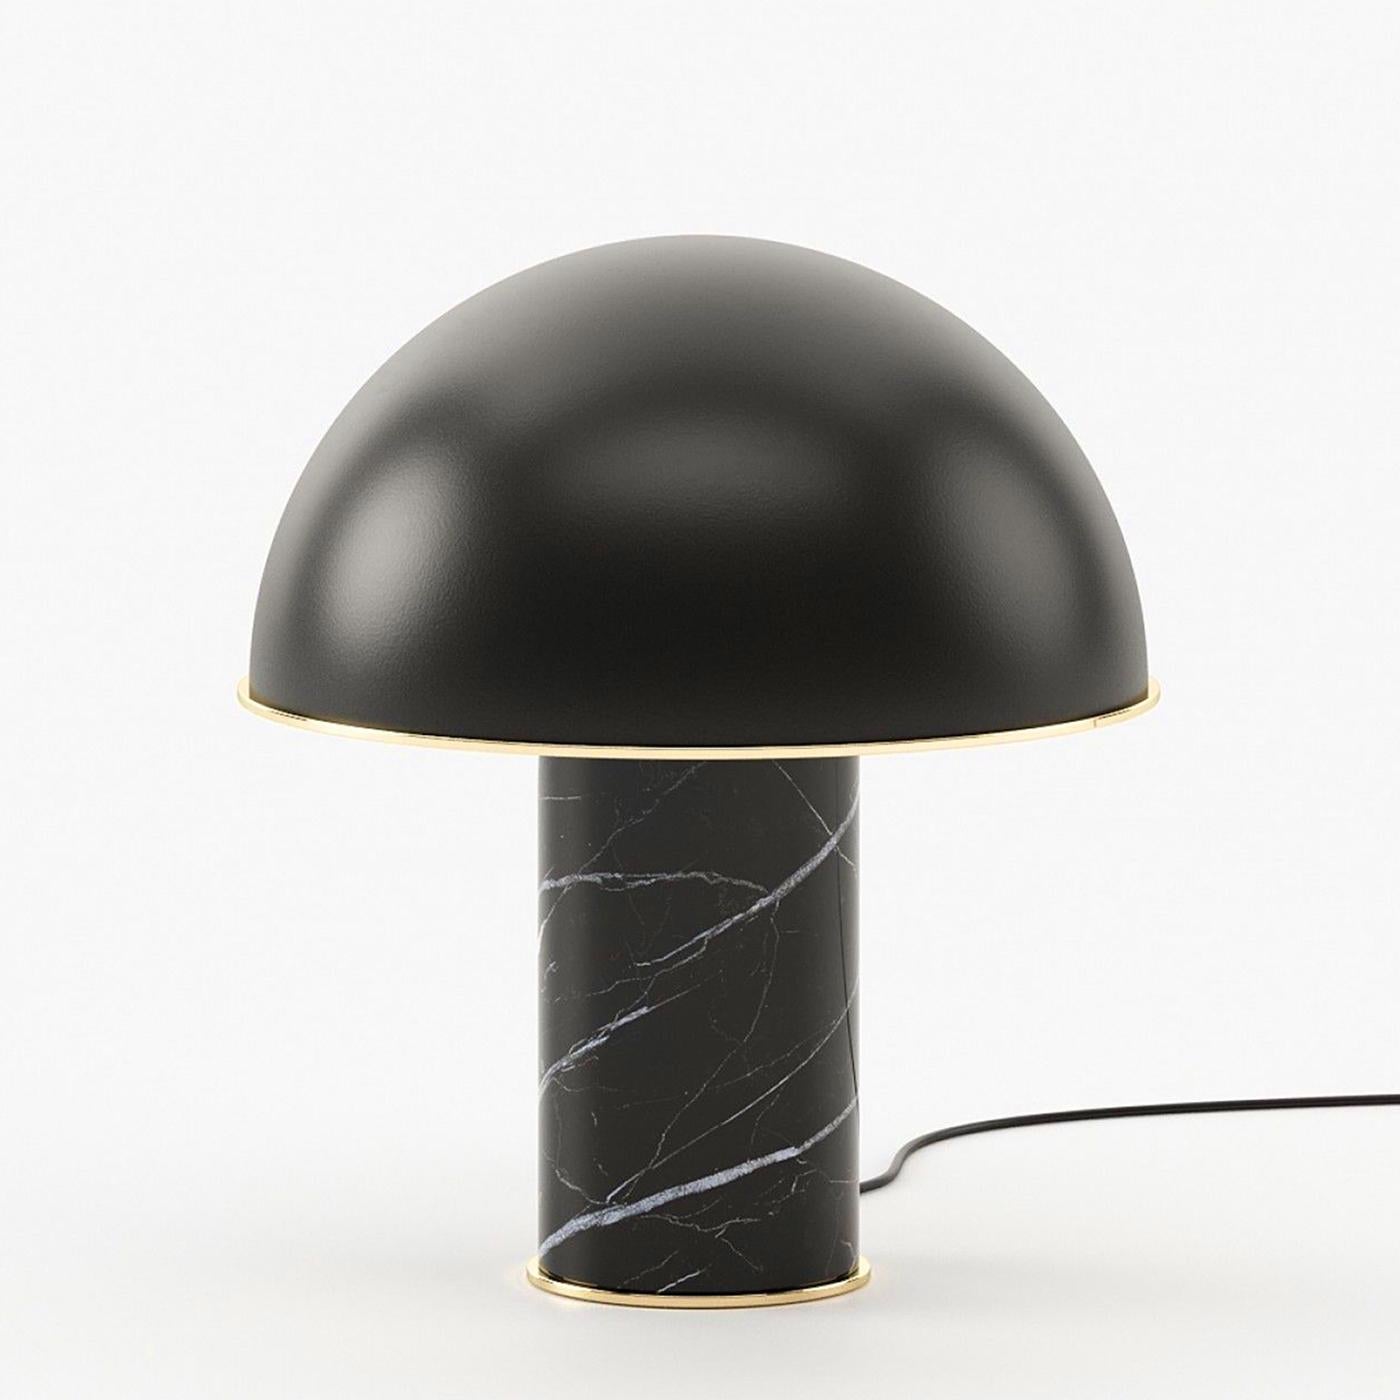 Table Lamp Dallas Marble with black marble base in polished finish
with polished stainless steel trim base. With iron lampshade in black 
finish with polished stainless steel trim. 1 bulb, bulb not included.
Also available in white marble finish,